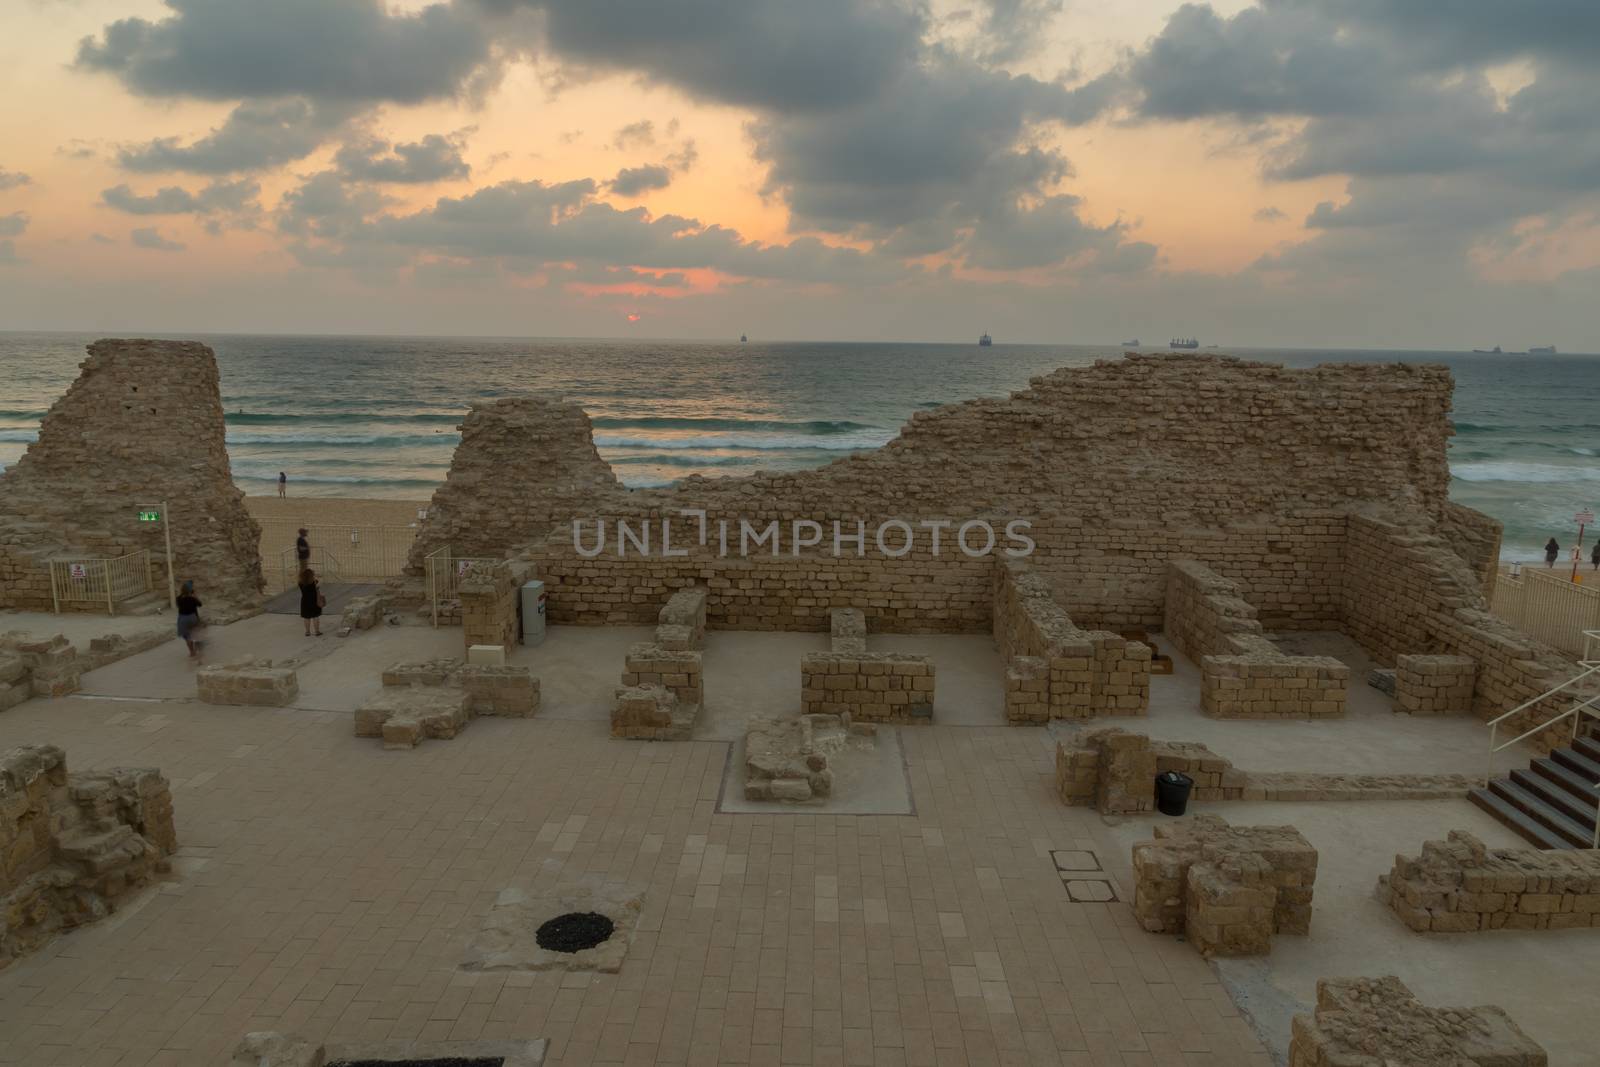 Ashdod, Israel - August 12, 2020: Sunset view of the remains of Ashdod Citadel (Ashdod Yam or Ashdod on the Sea), with visitors. Southern Israel